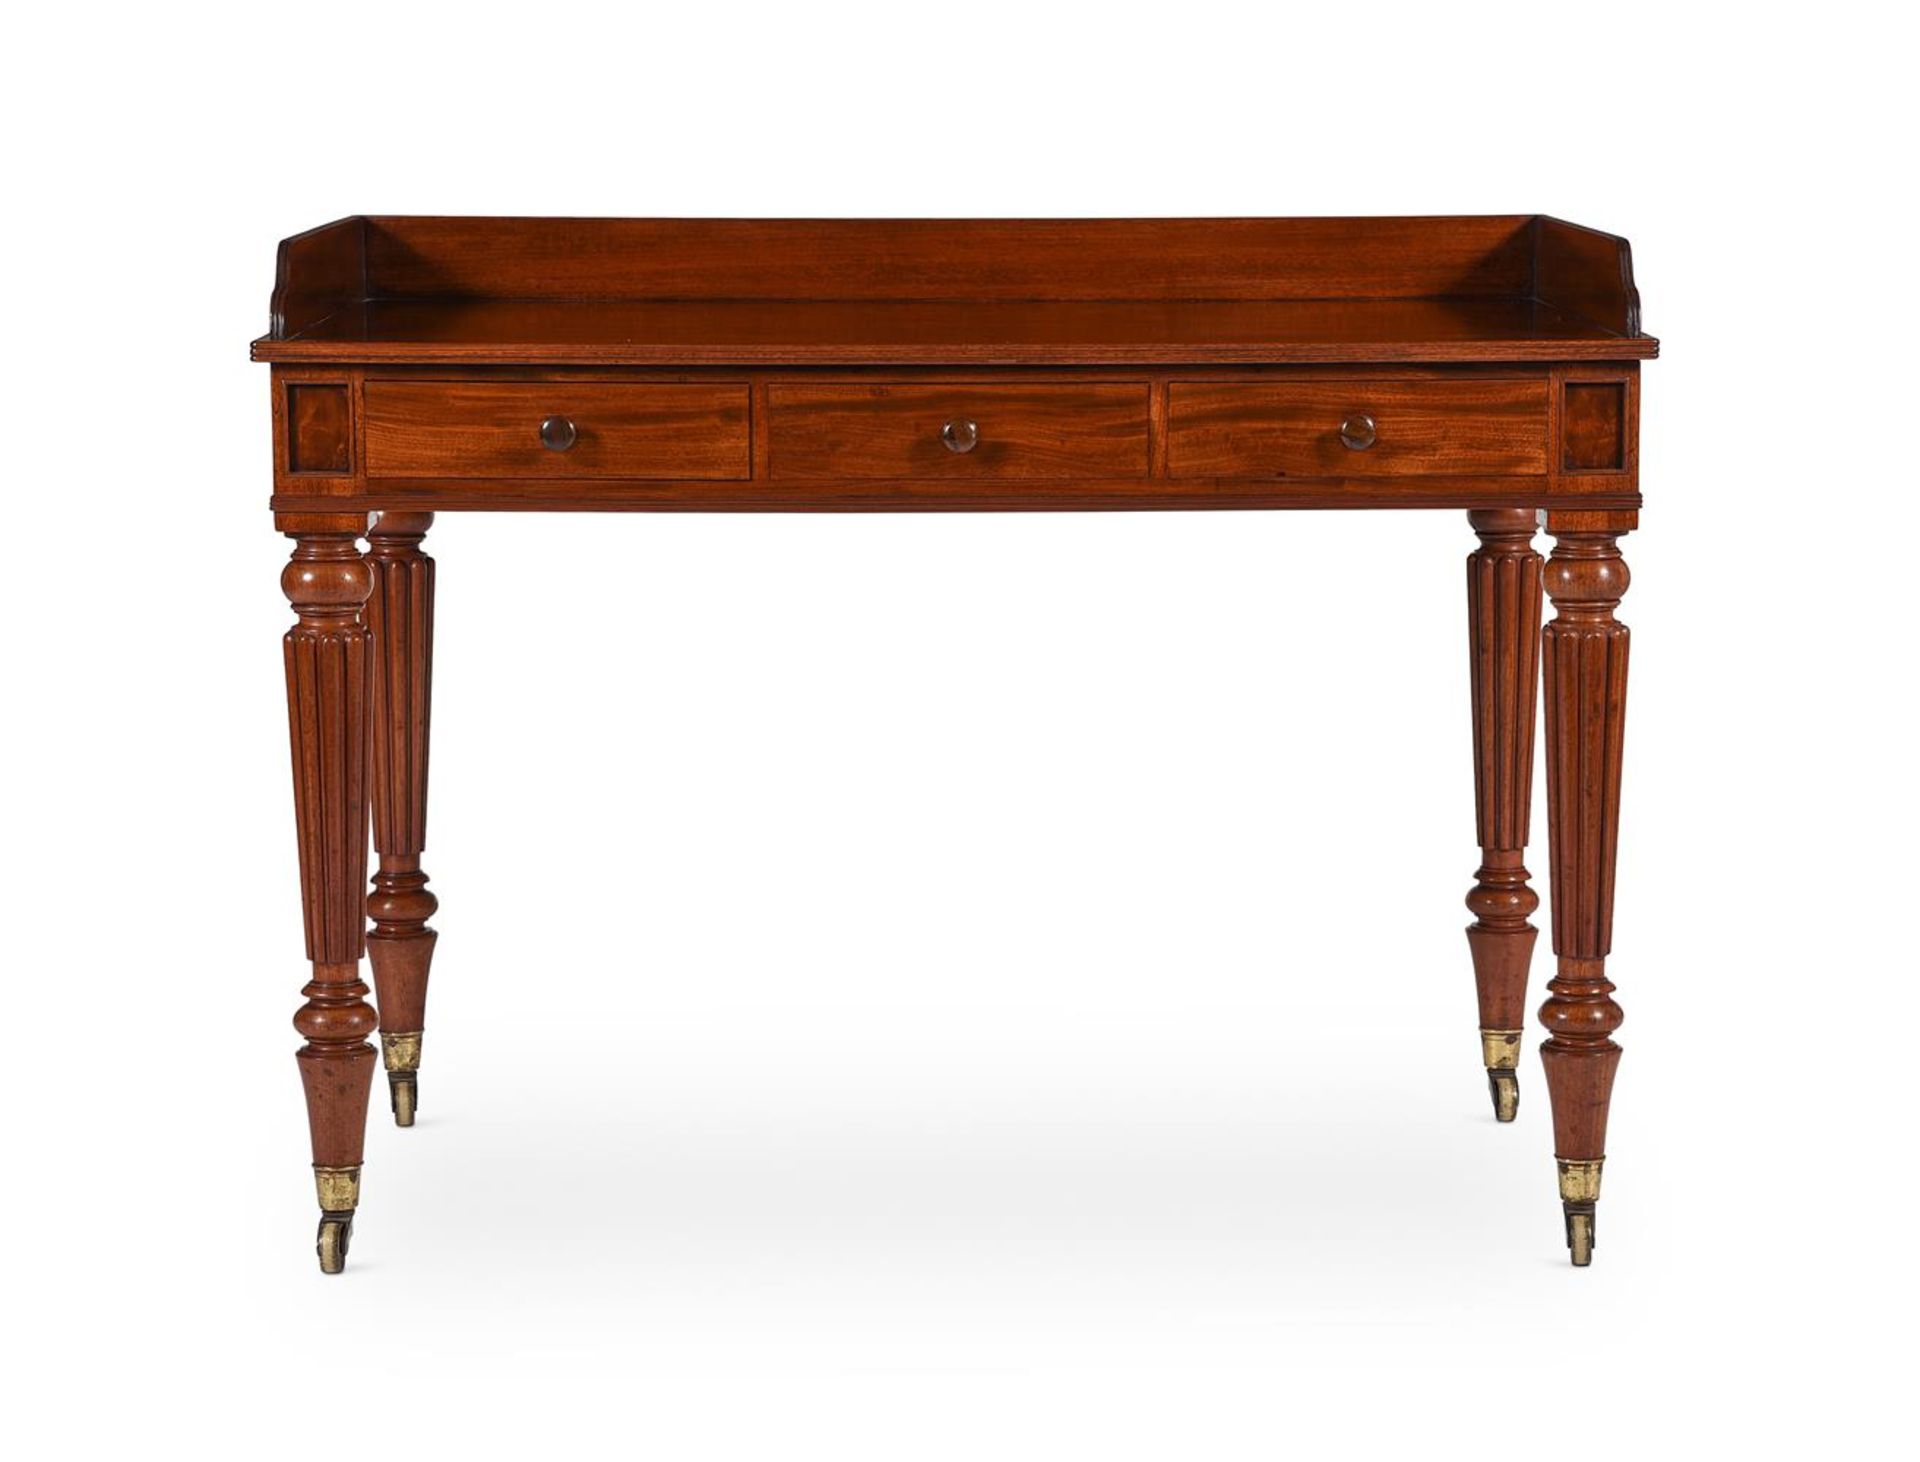 Y A GEORGE IV MAHOGANY DRESSING TABLE, IN THE MANNER OF GILLOWS, CIRCA 1825